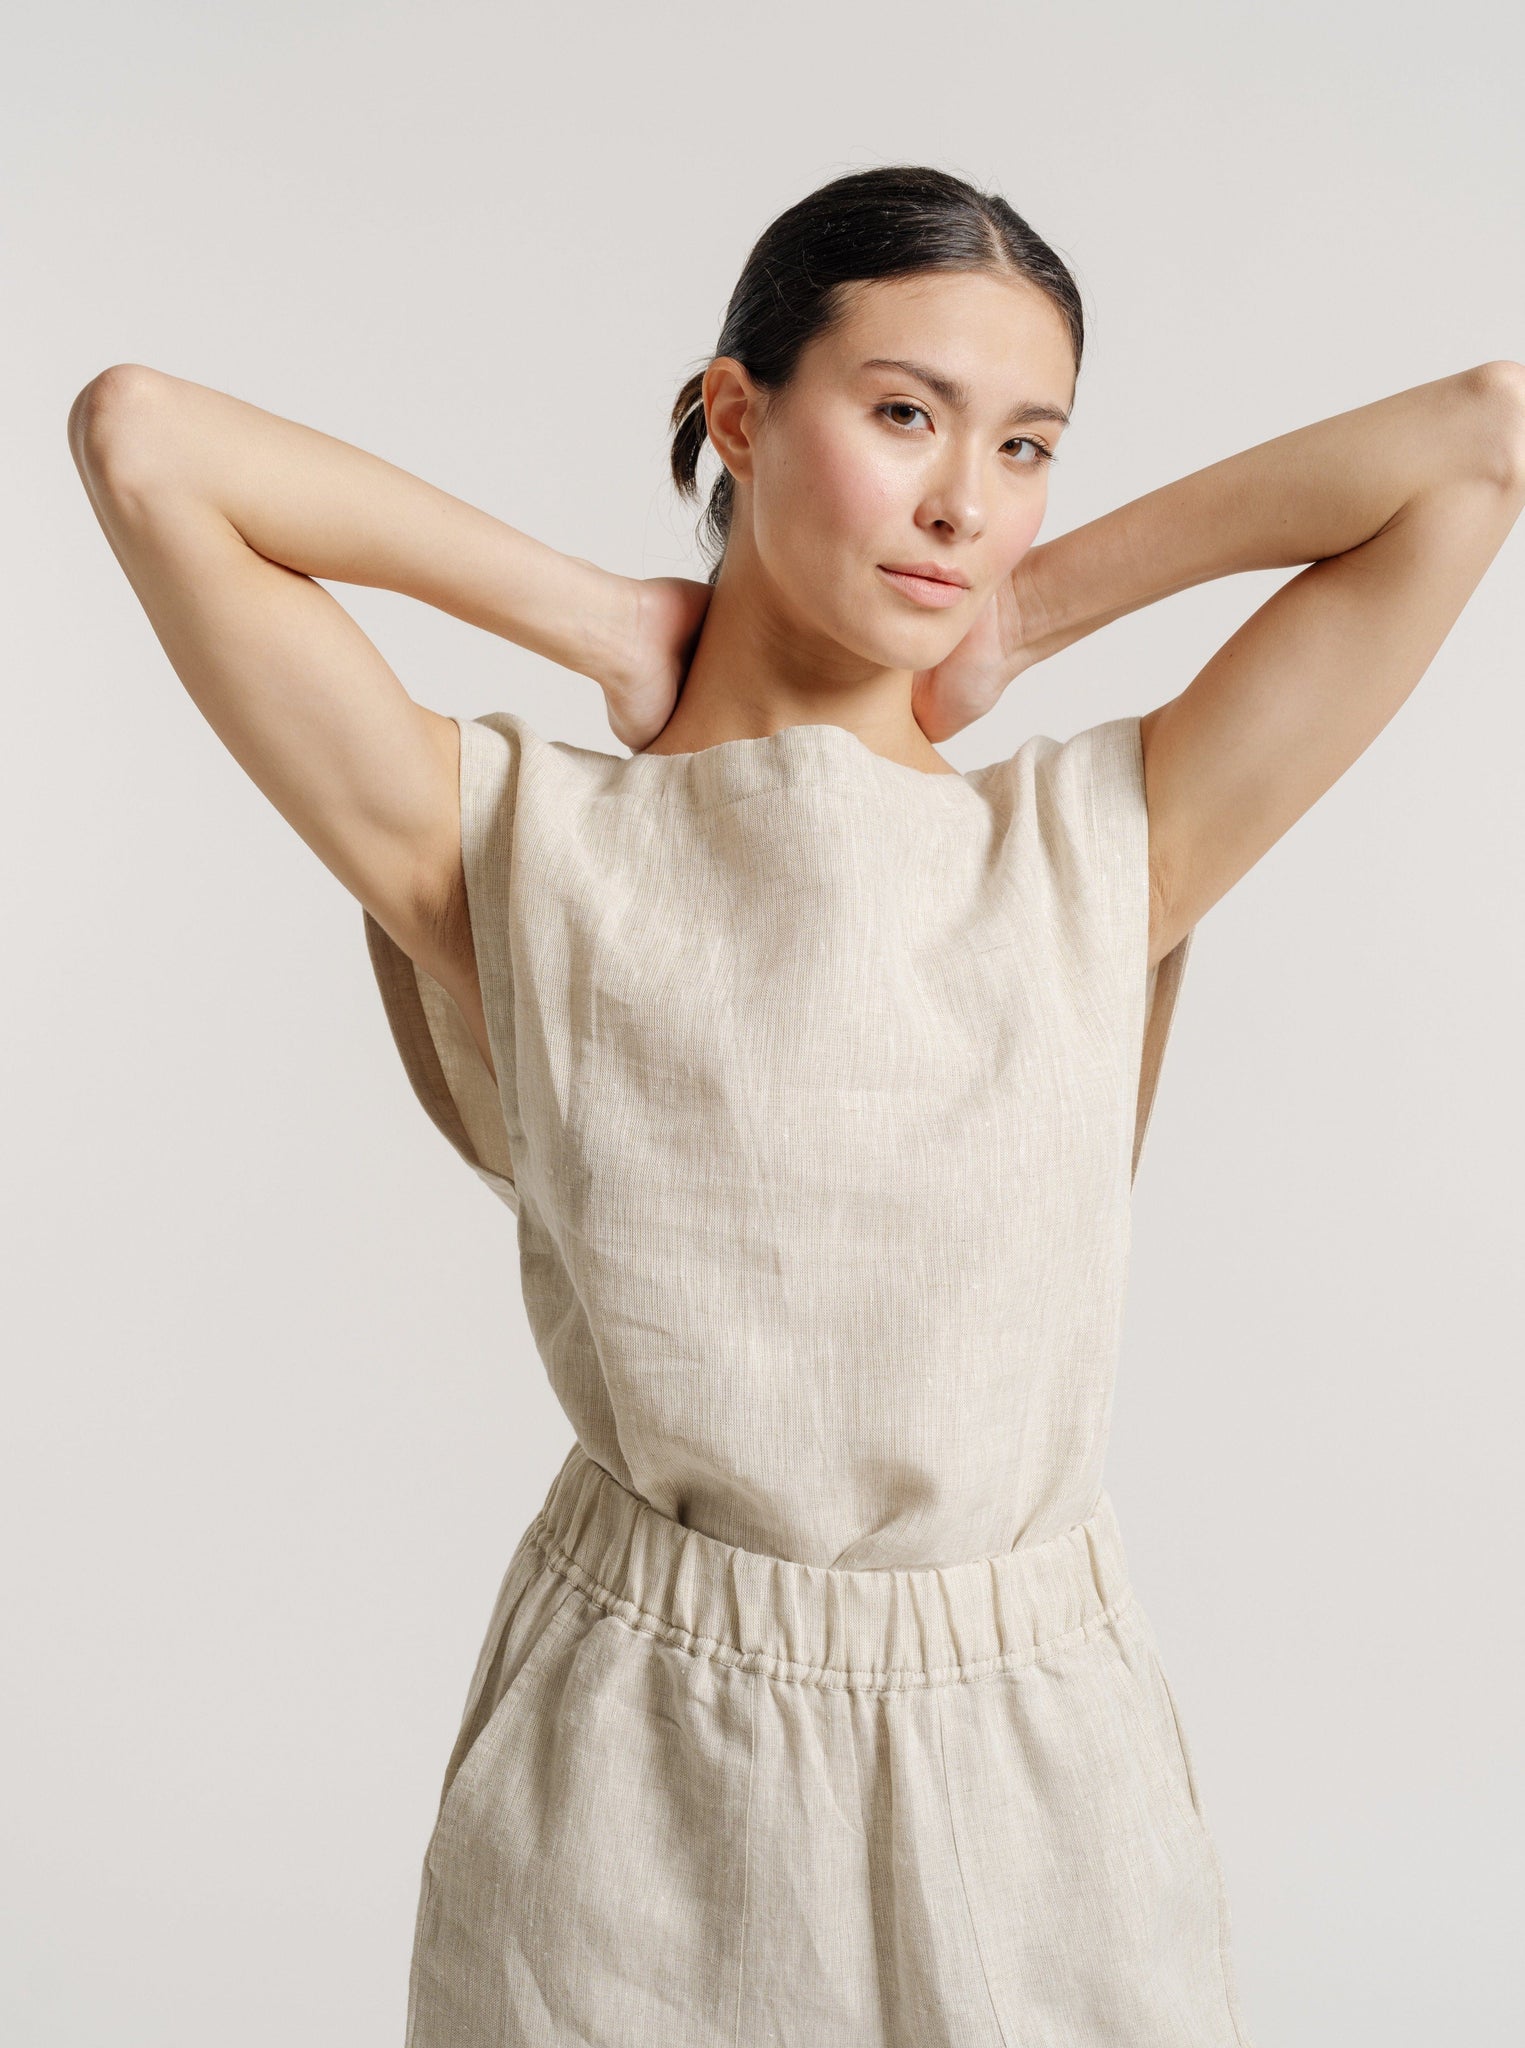 An Everyday Top - Natural Linen made of certified organic linen in beige, paired with shorts.